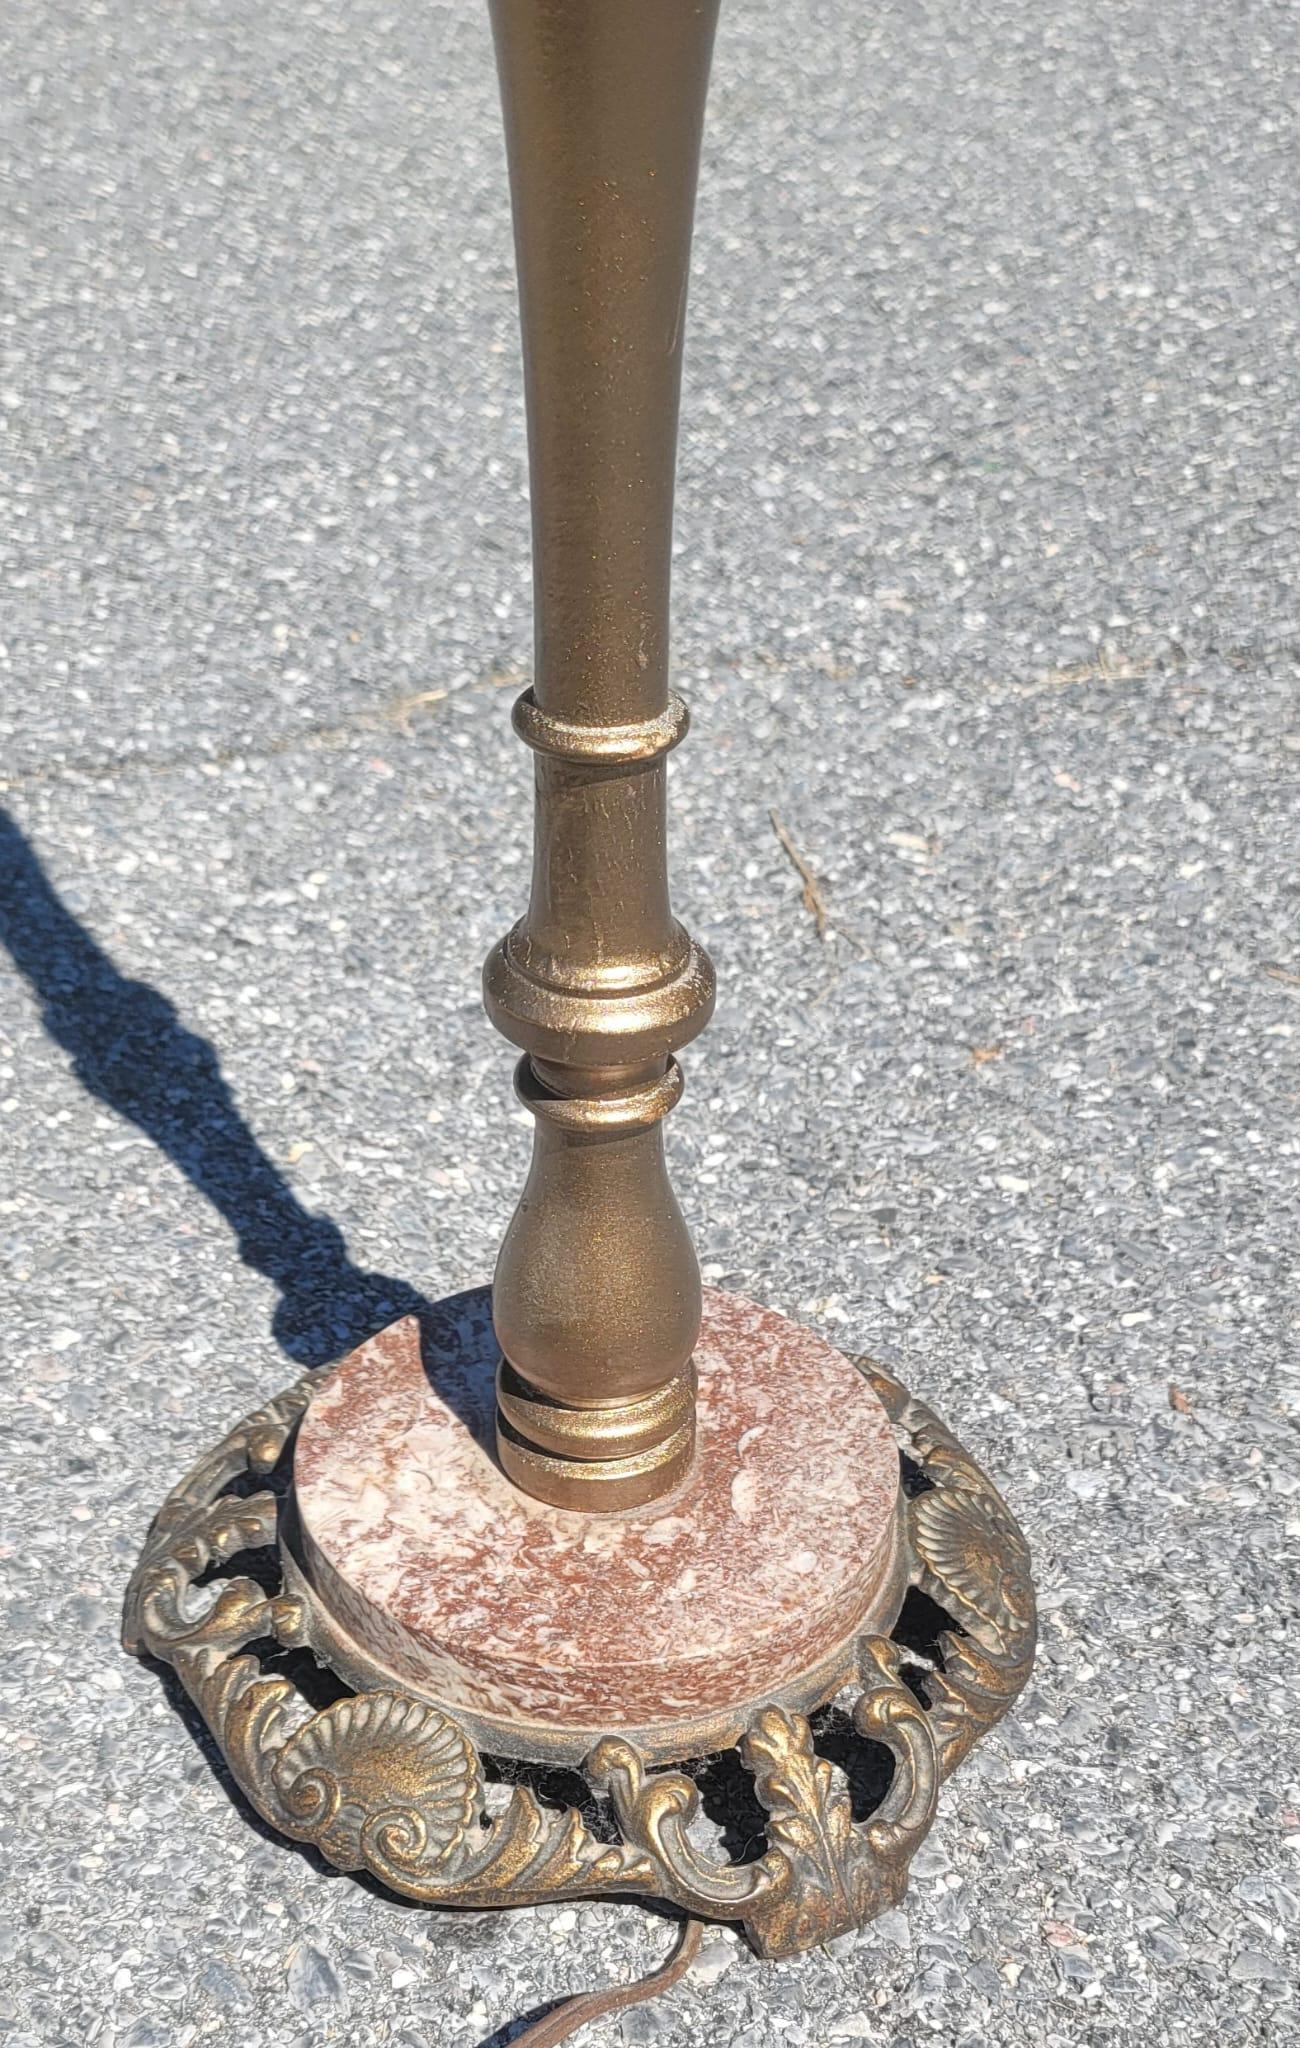 Absolutely beautiful 1920's Bridge floor lamp with a metal and marble base and giltwood pole. This magnificent lamp stands approximately 60